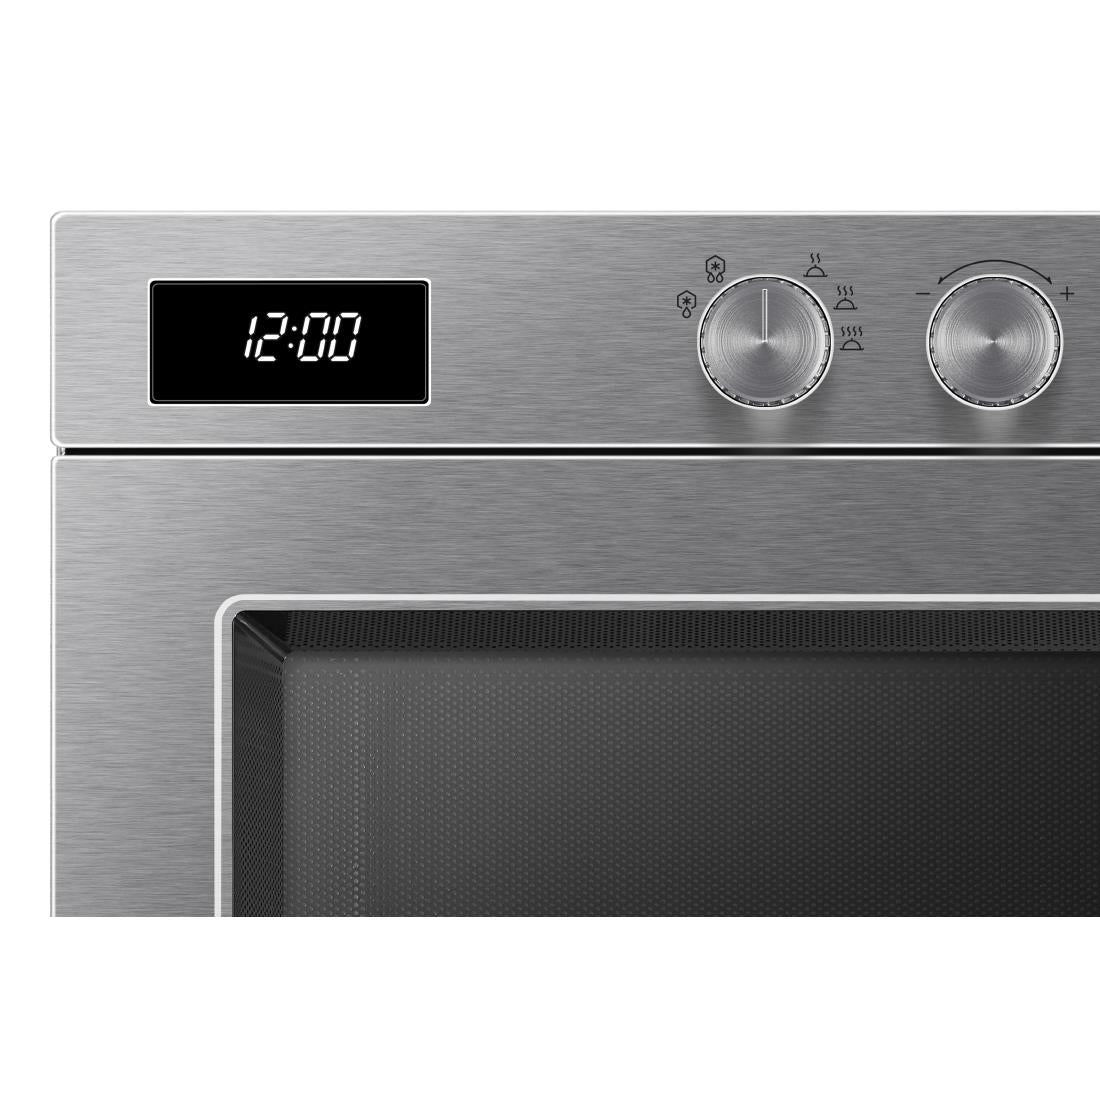 Samsung Manual Commercial Microwave 1850W FS315